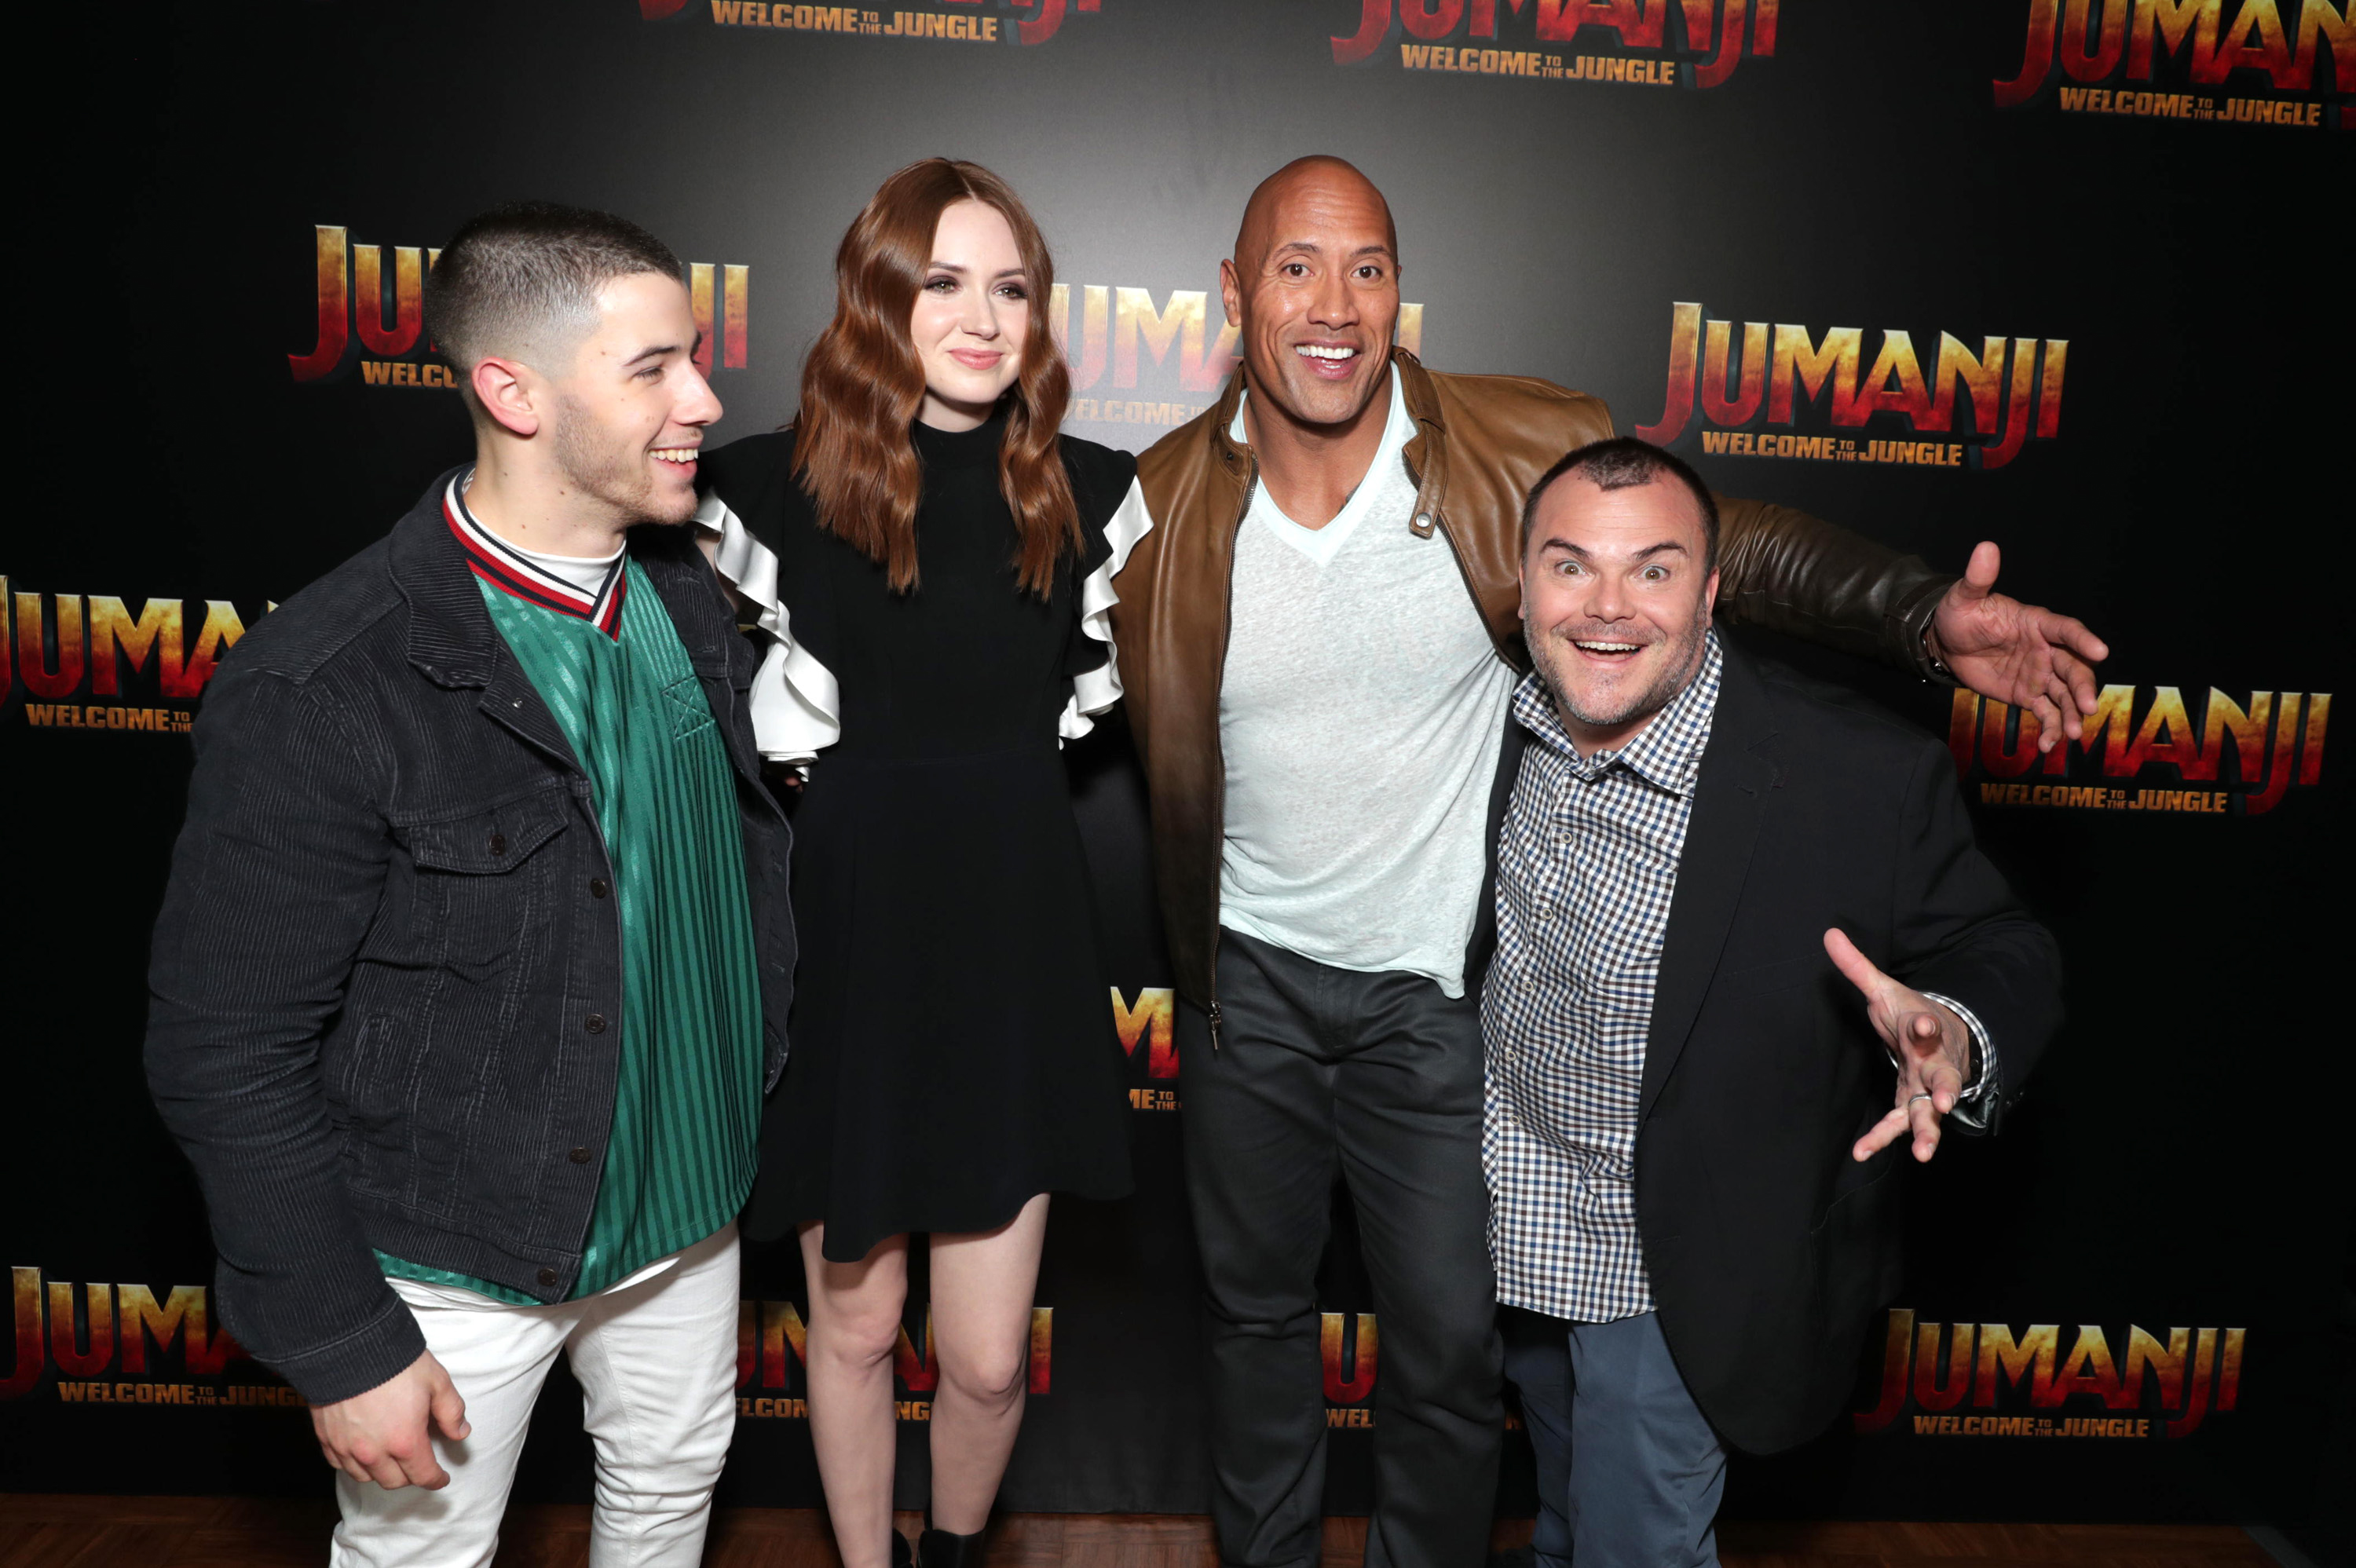 Nick Jonas, Karen Gillan, Dwayne Johnson and Jack Black seen at Columbia Pictures 'Jumanji: Welcome to the Jungle' photo call at 2017 CinemaCon on Monday, March 27, 2017, in Las Vegas.